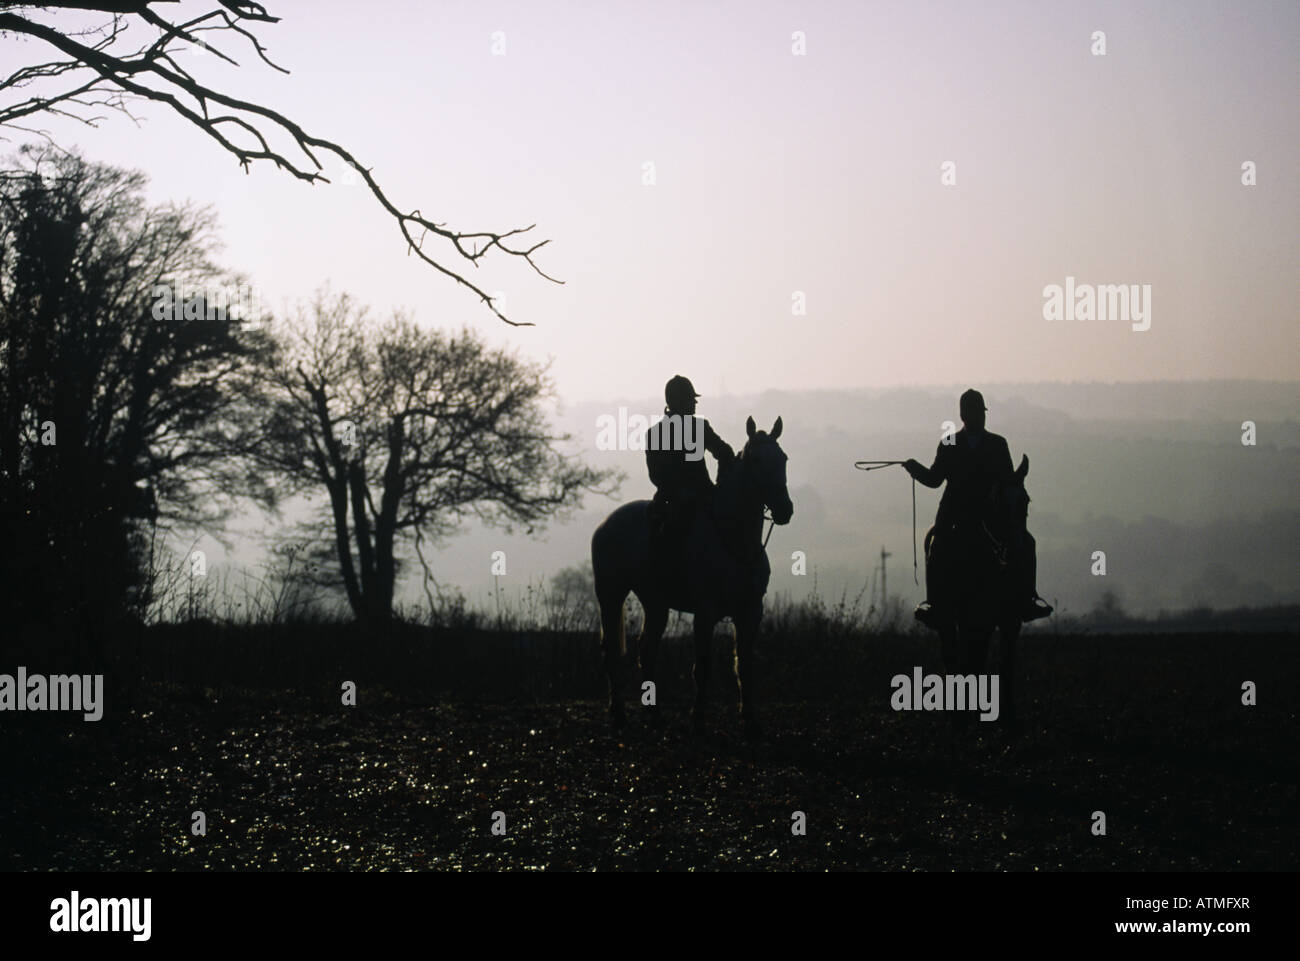 Drag hunting fox hunting Silhouette of two people riders on horseback Against pink sky sunset dawn Stock Photo